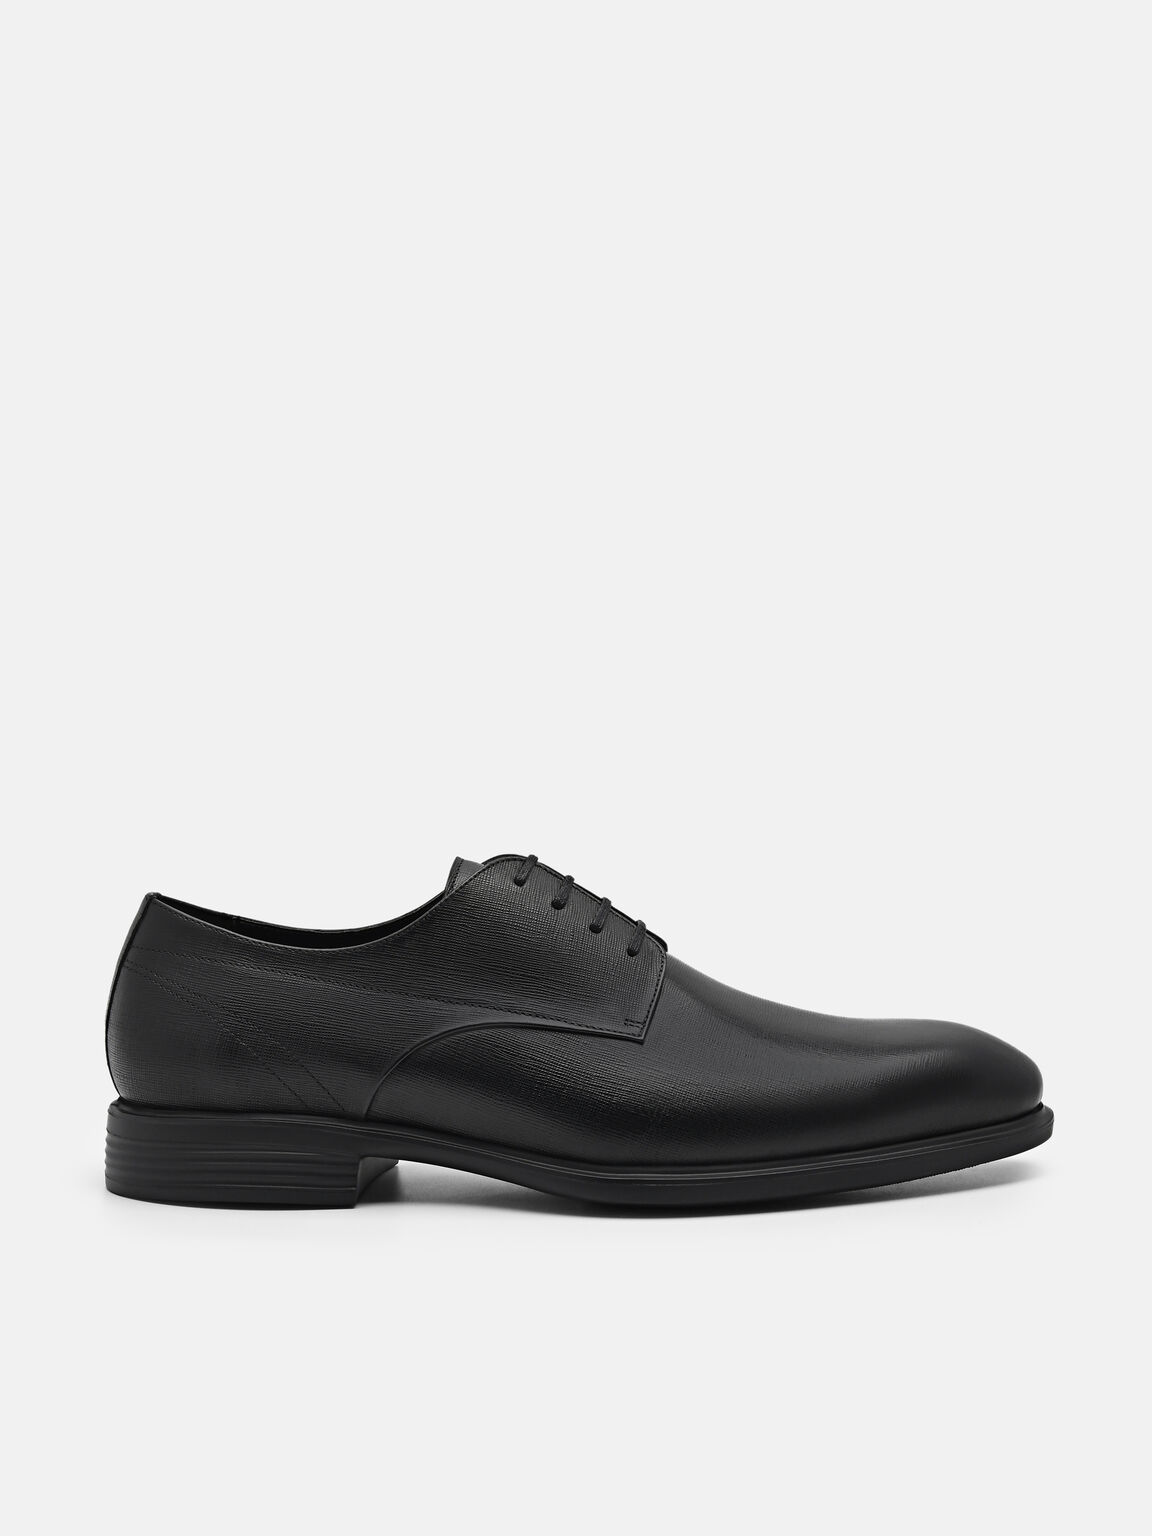 Black Altitude Lightweight Leather Derby Shoes - PEDRO SG